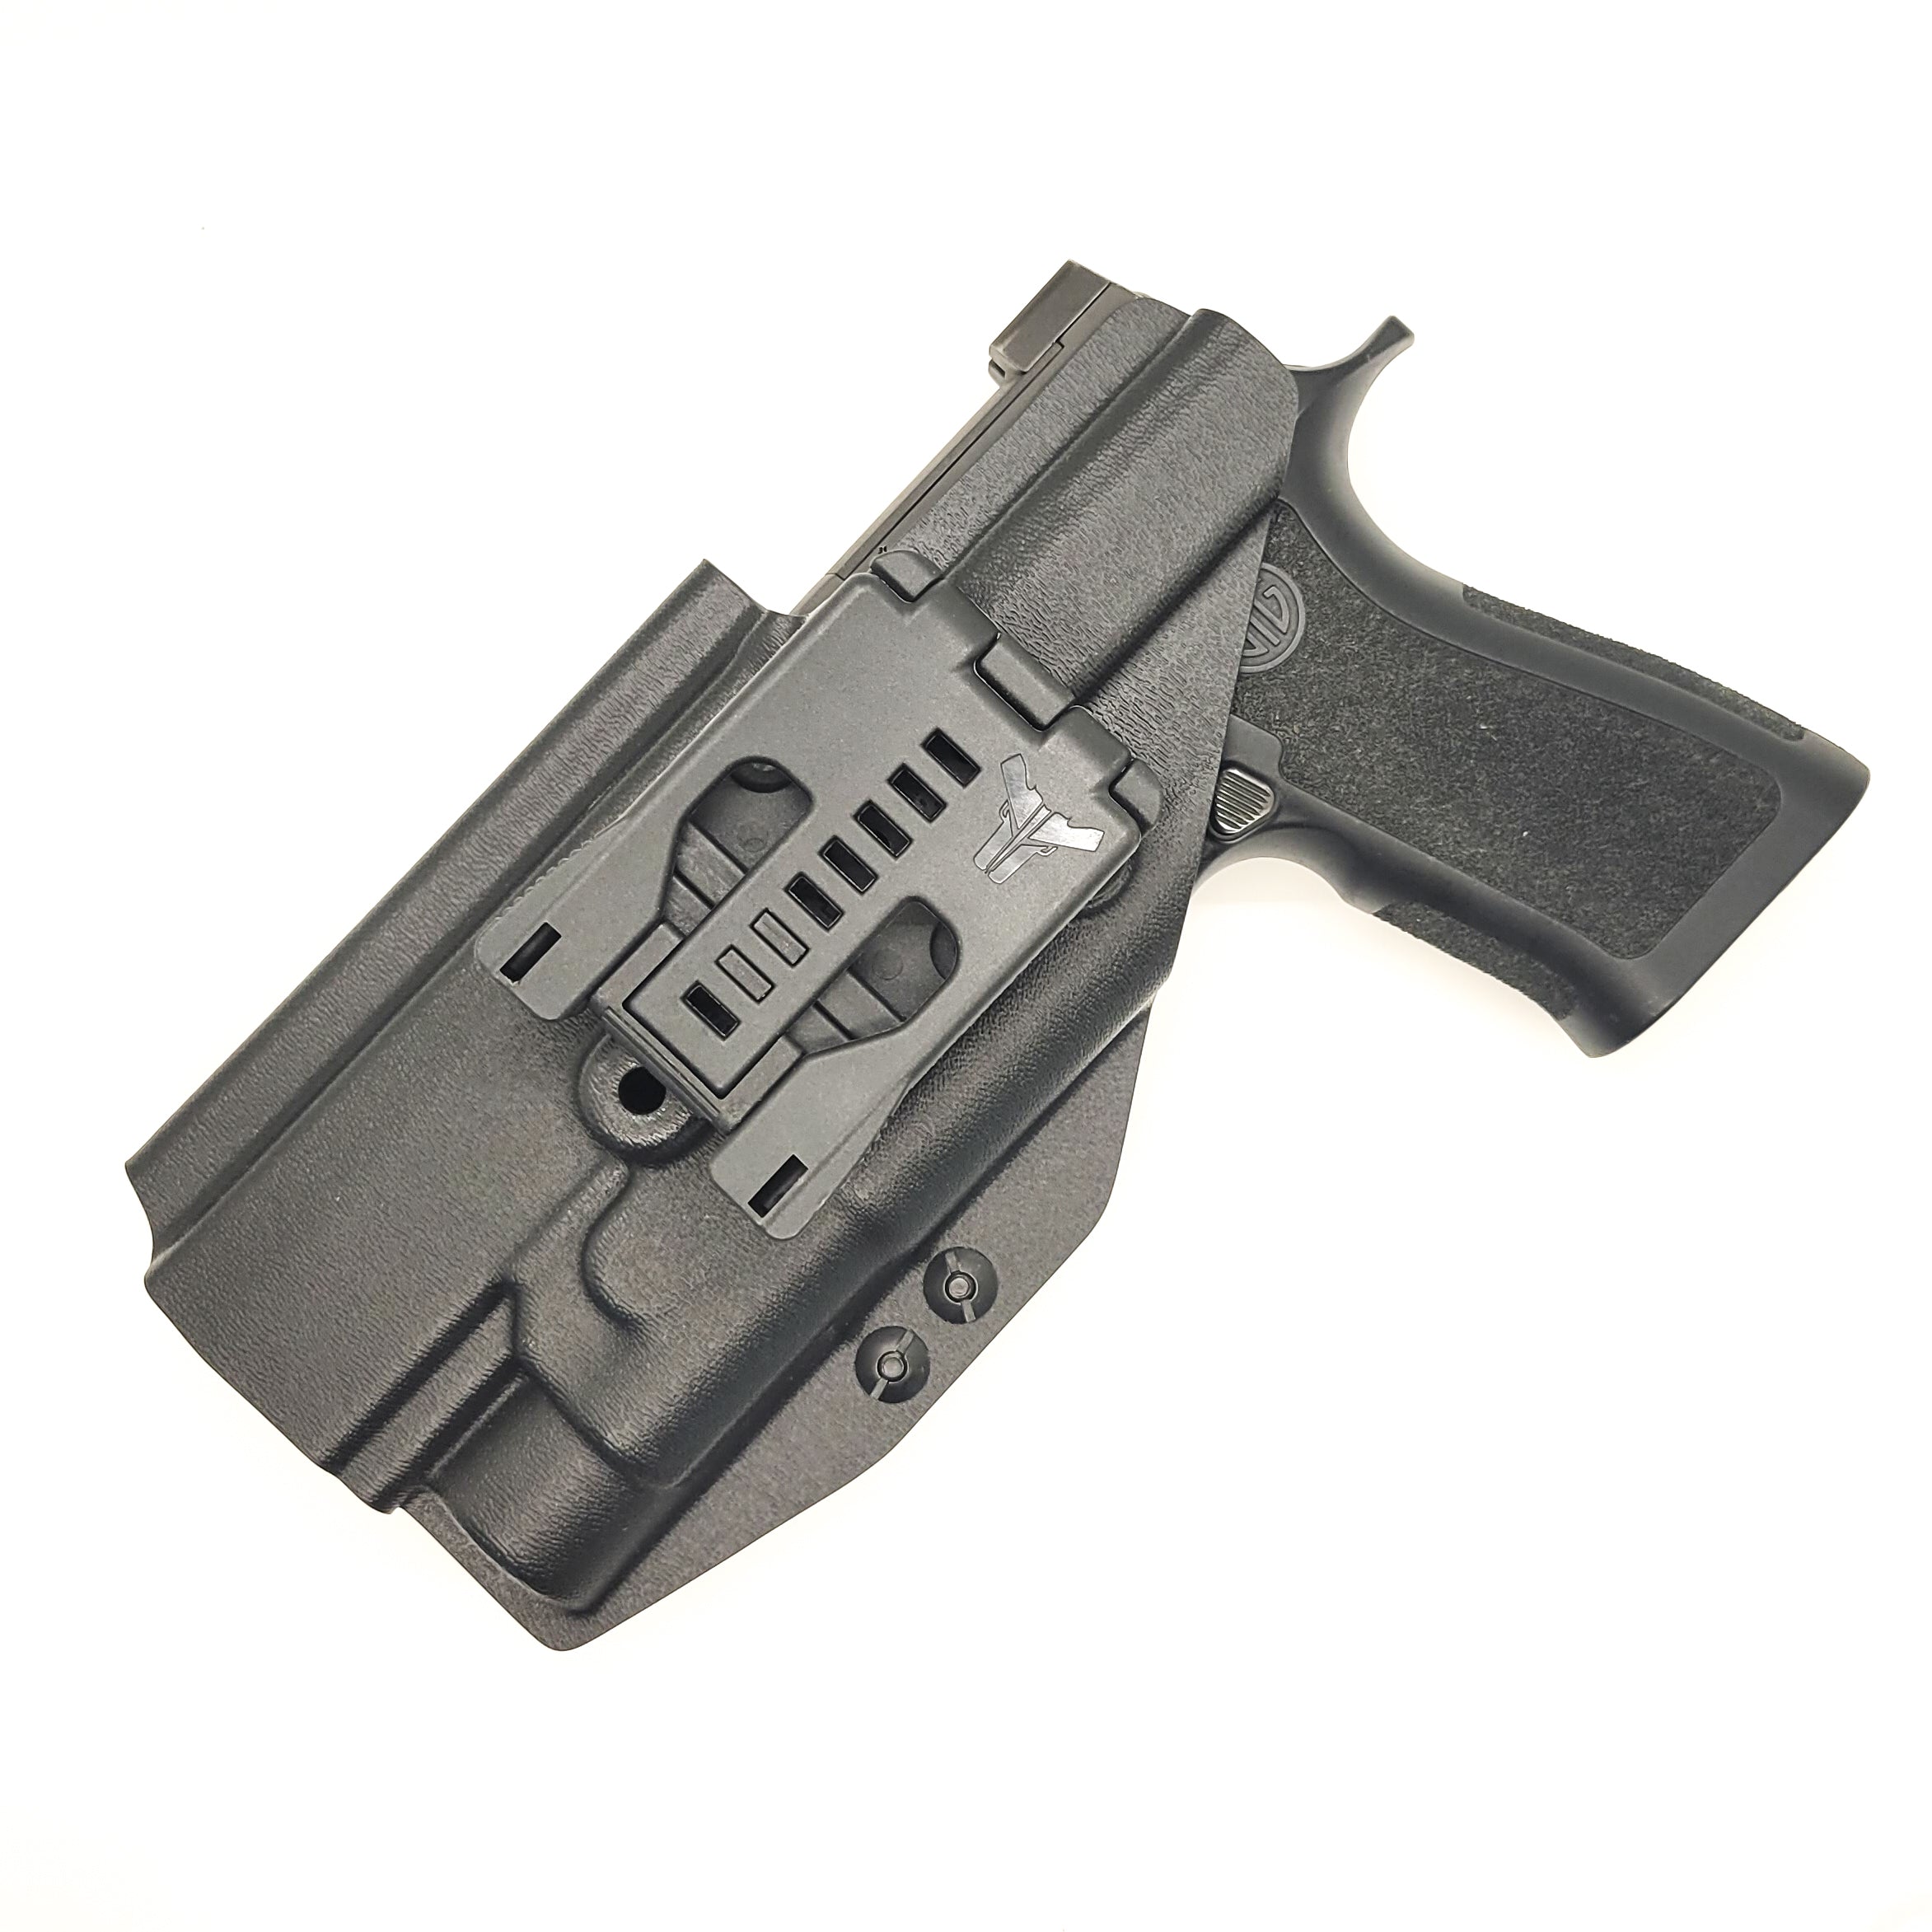 Outside Waistband Kydex Holster designed to fit the Full Size and Carry P320 series with Streamlight TLR-1 and TLR-1HL weapon mounted light and GoGuns USA Gas Pedal Holster will accommodate the M17, M18 and X-Five models as well as the Carry and Compact. The holster retention is on the light itself. Made in the USA 